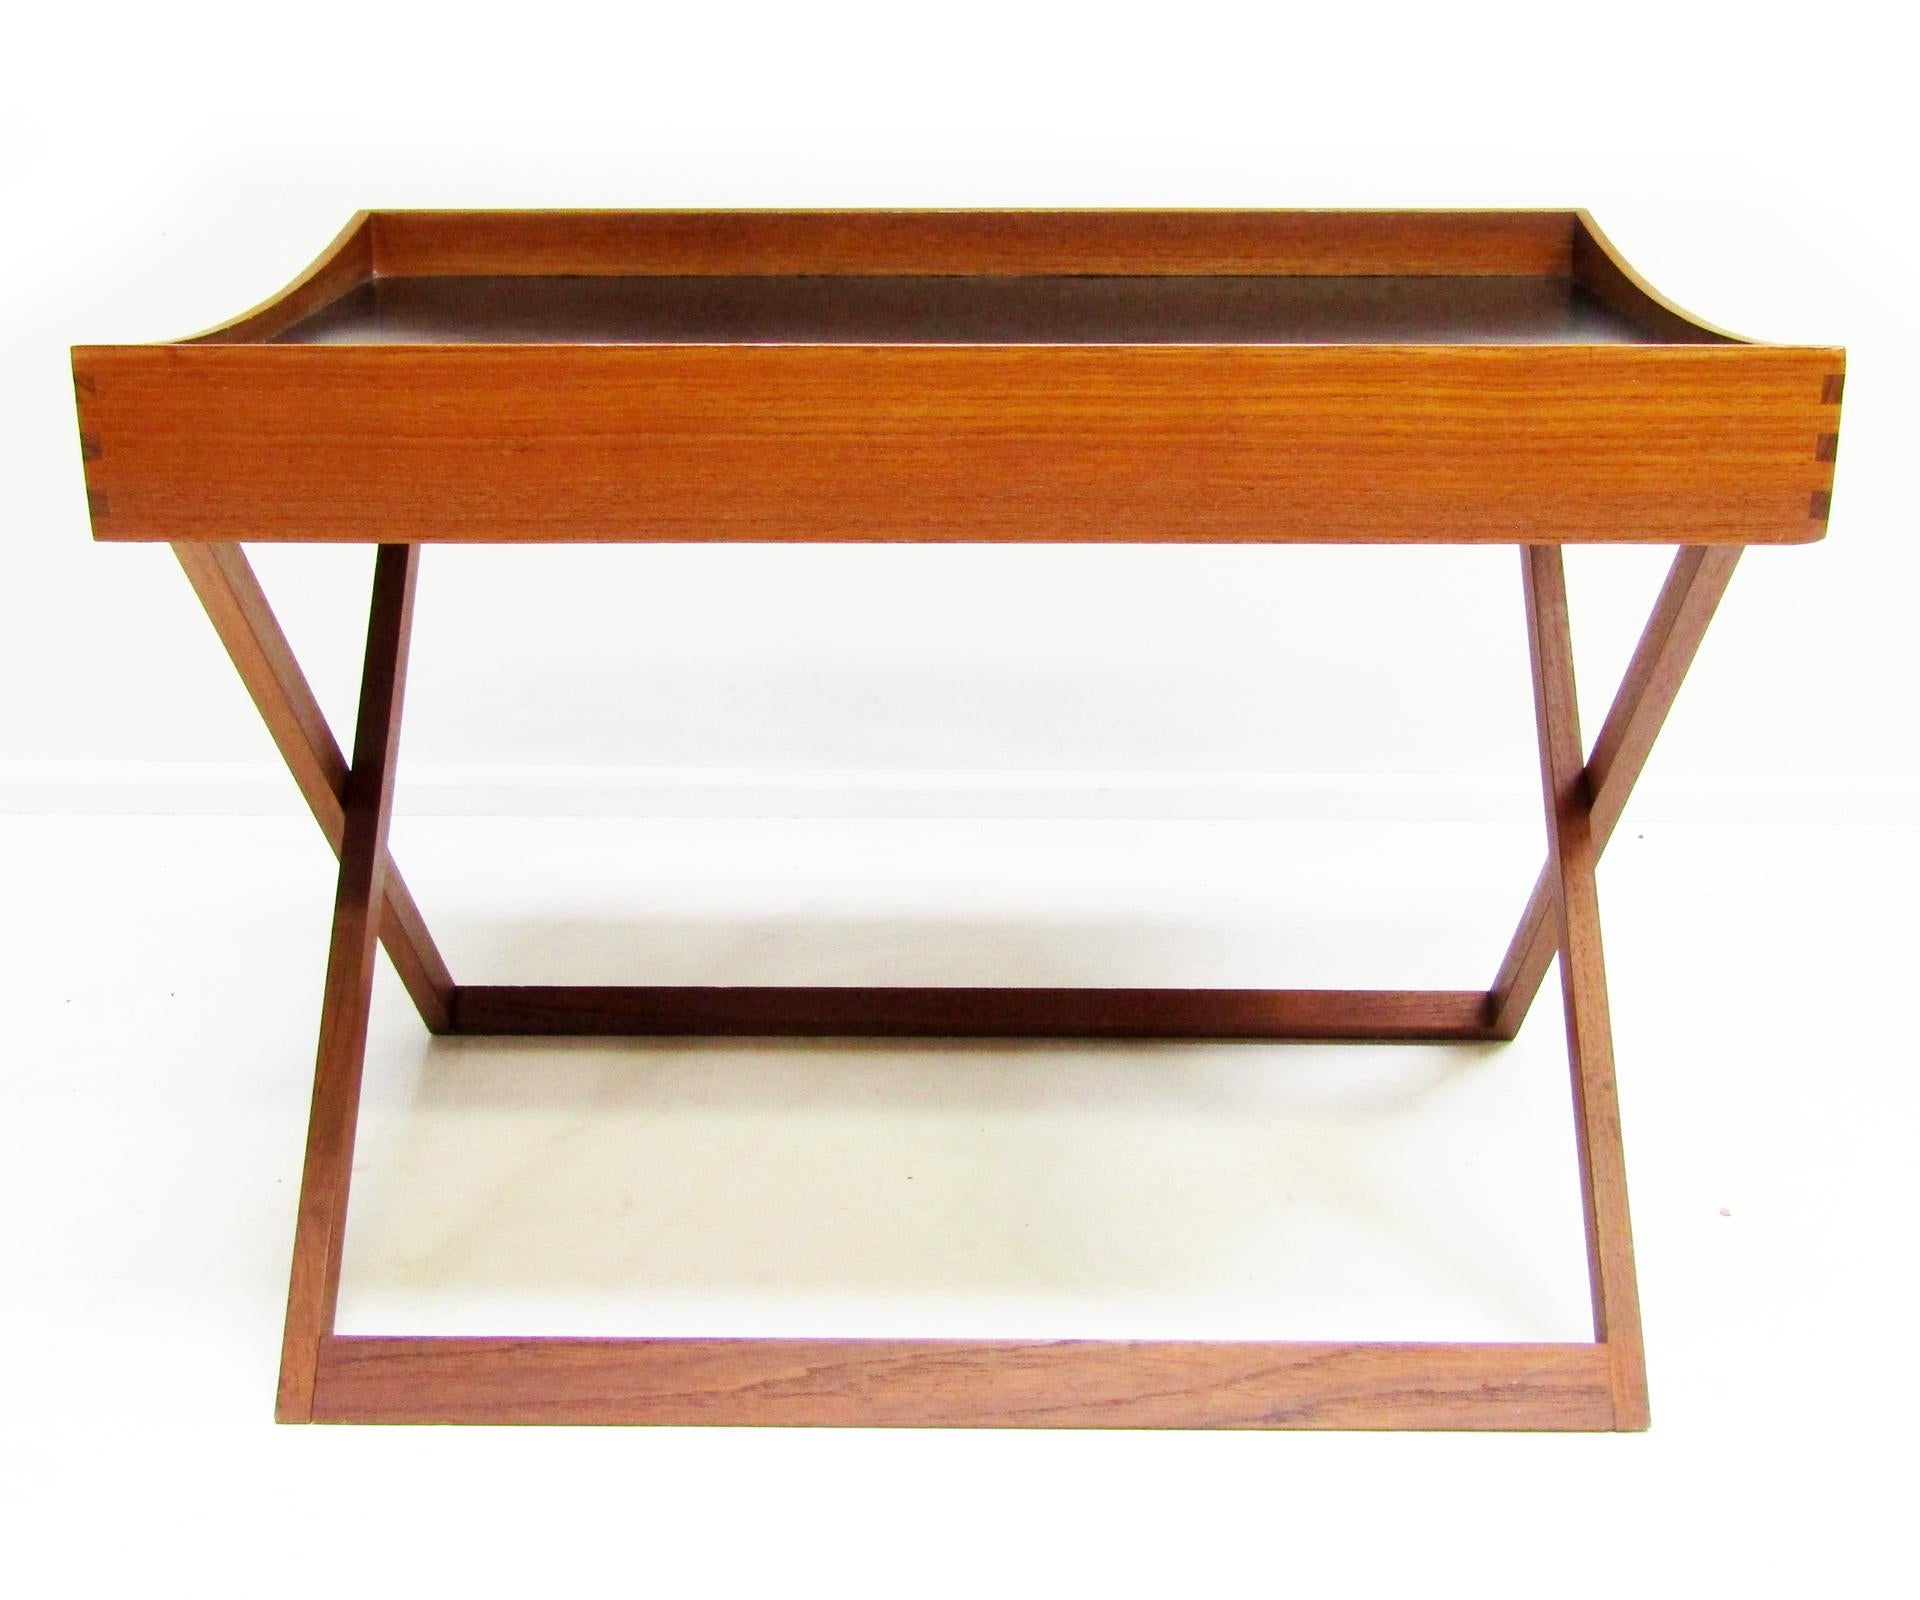 Formica 1960s Danish Folding Campaign Side Table In Teak By Torsten Johansson For Bo Ex For Sale